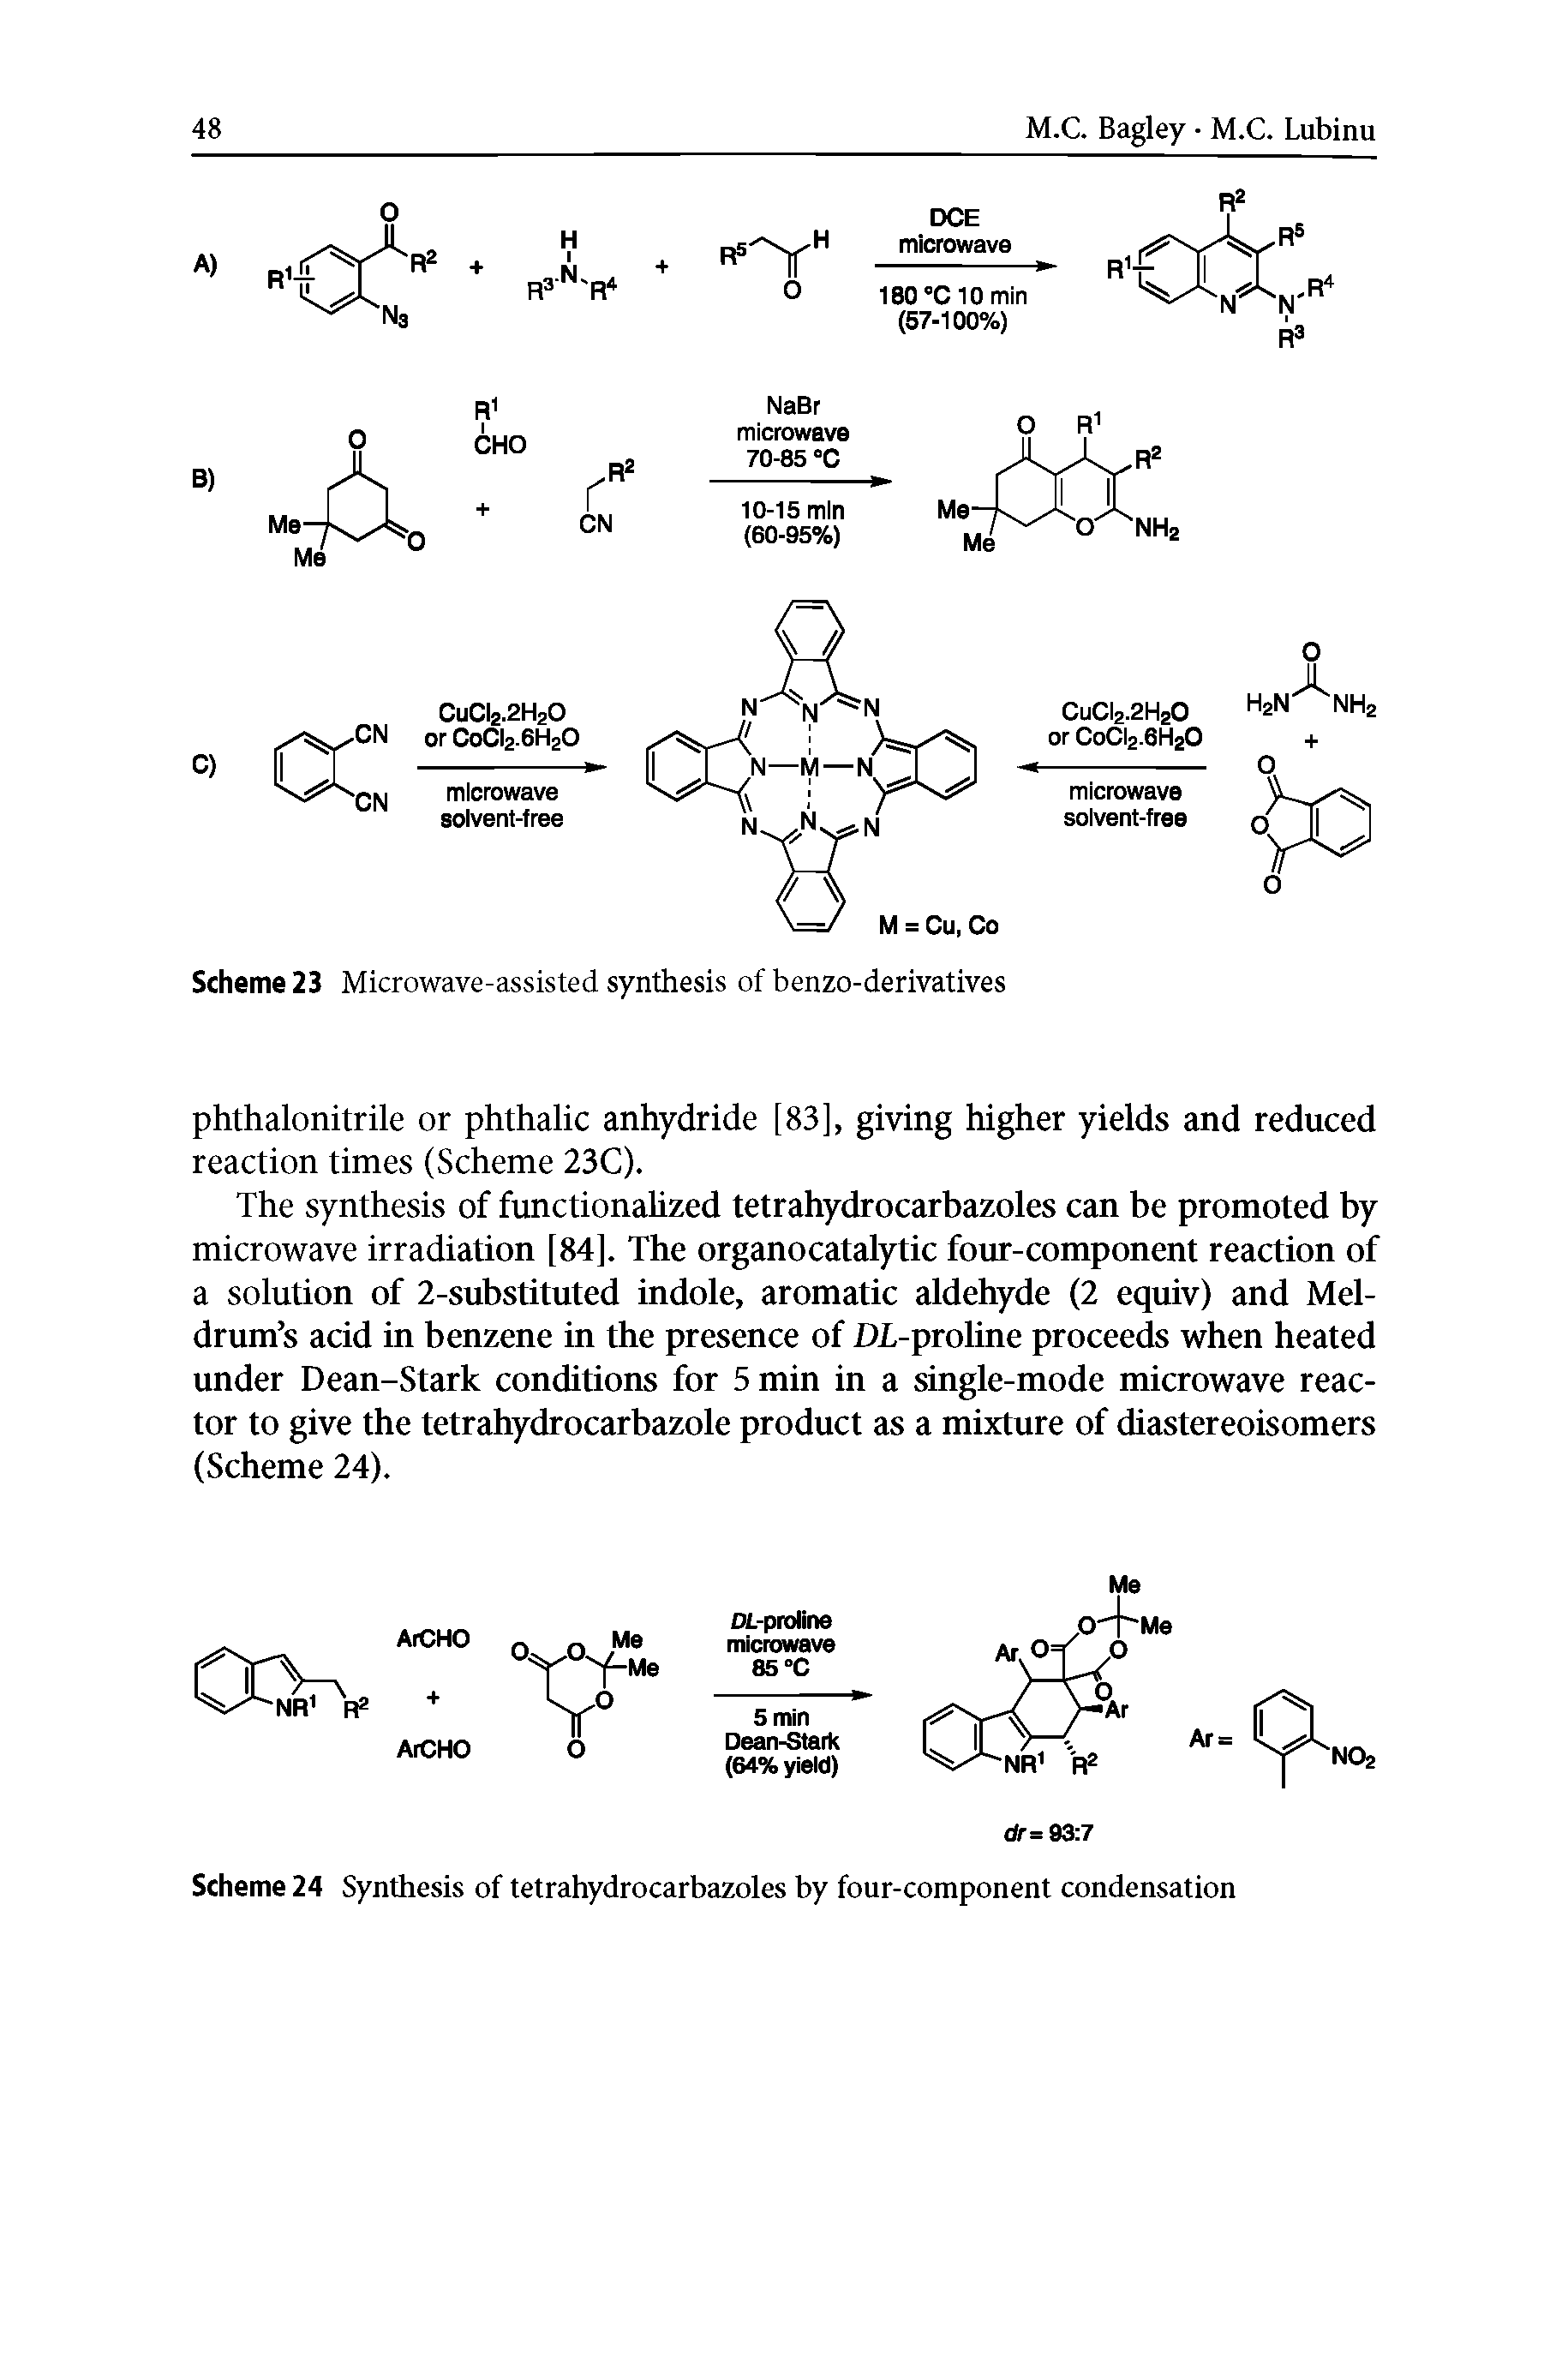 Scheme 23 Microwave-assisted synthesis of benzo-derivatives...